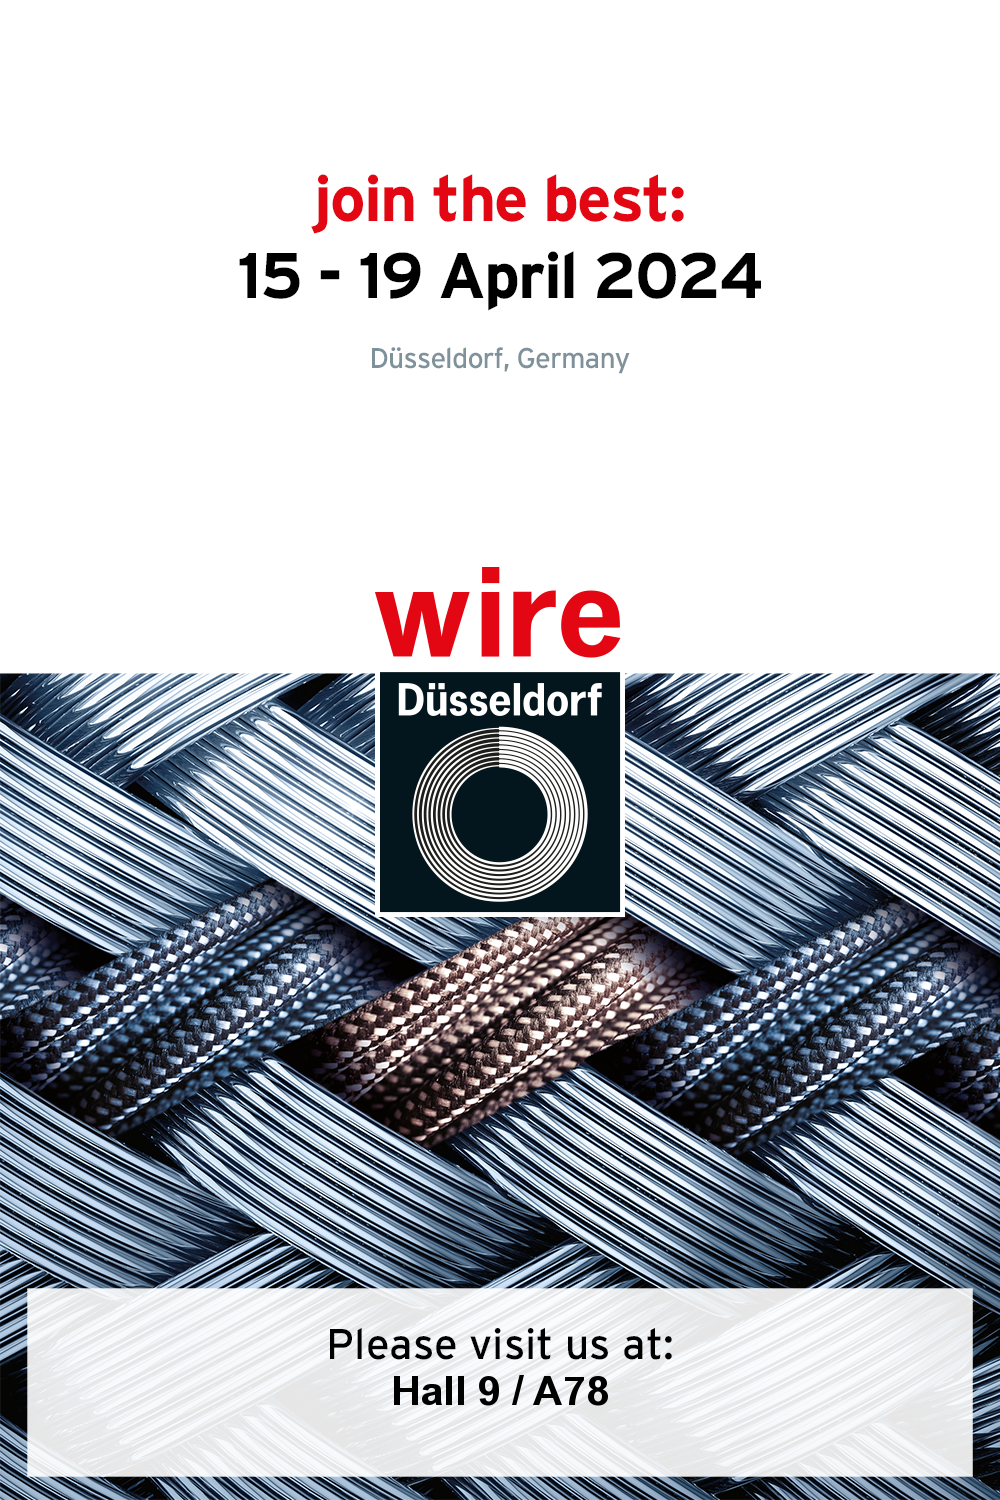 Gloser will attend WIRE 2024 inDusseldorf . Visit us at – Hall 9 Stand A78- Looking forward to seeing you there!